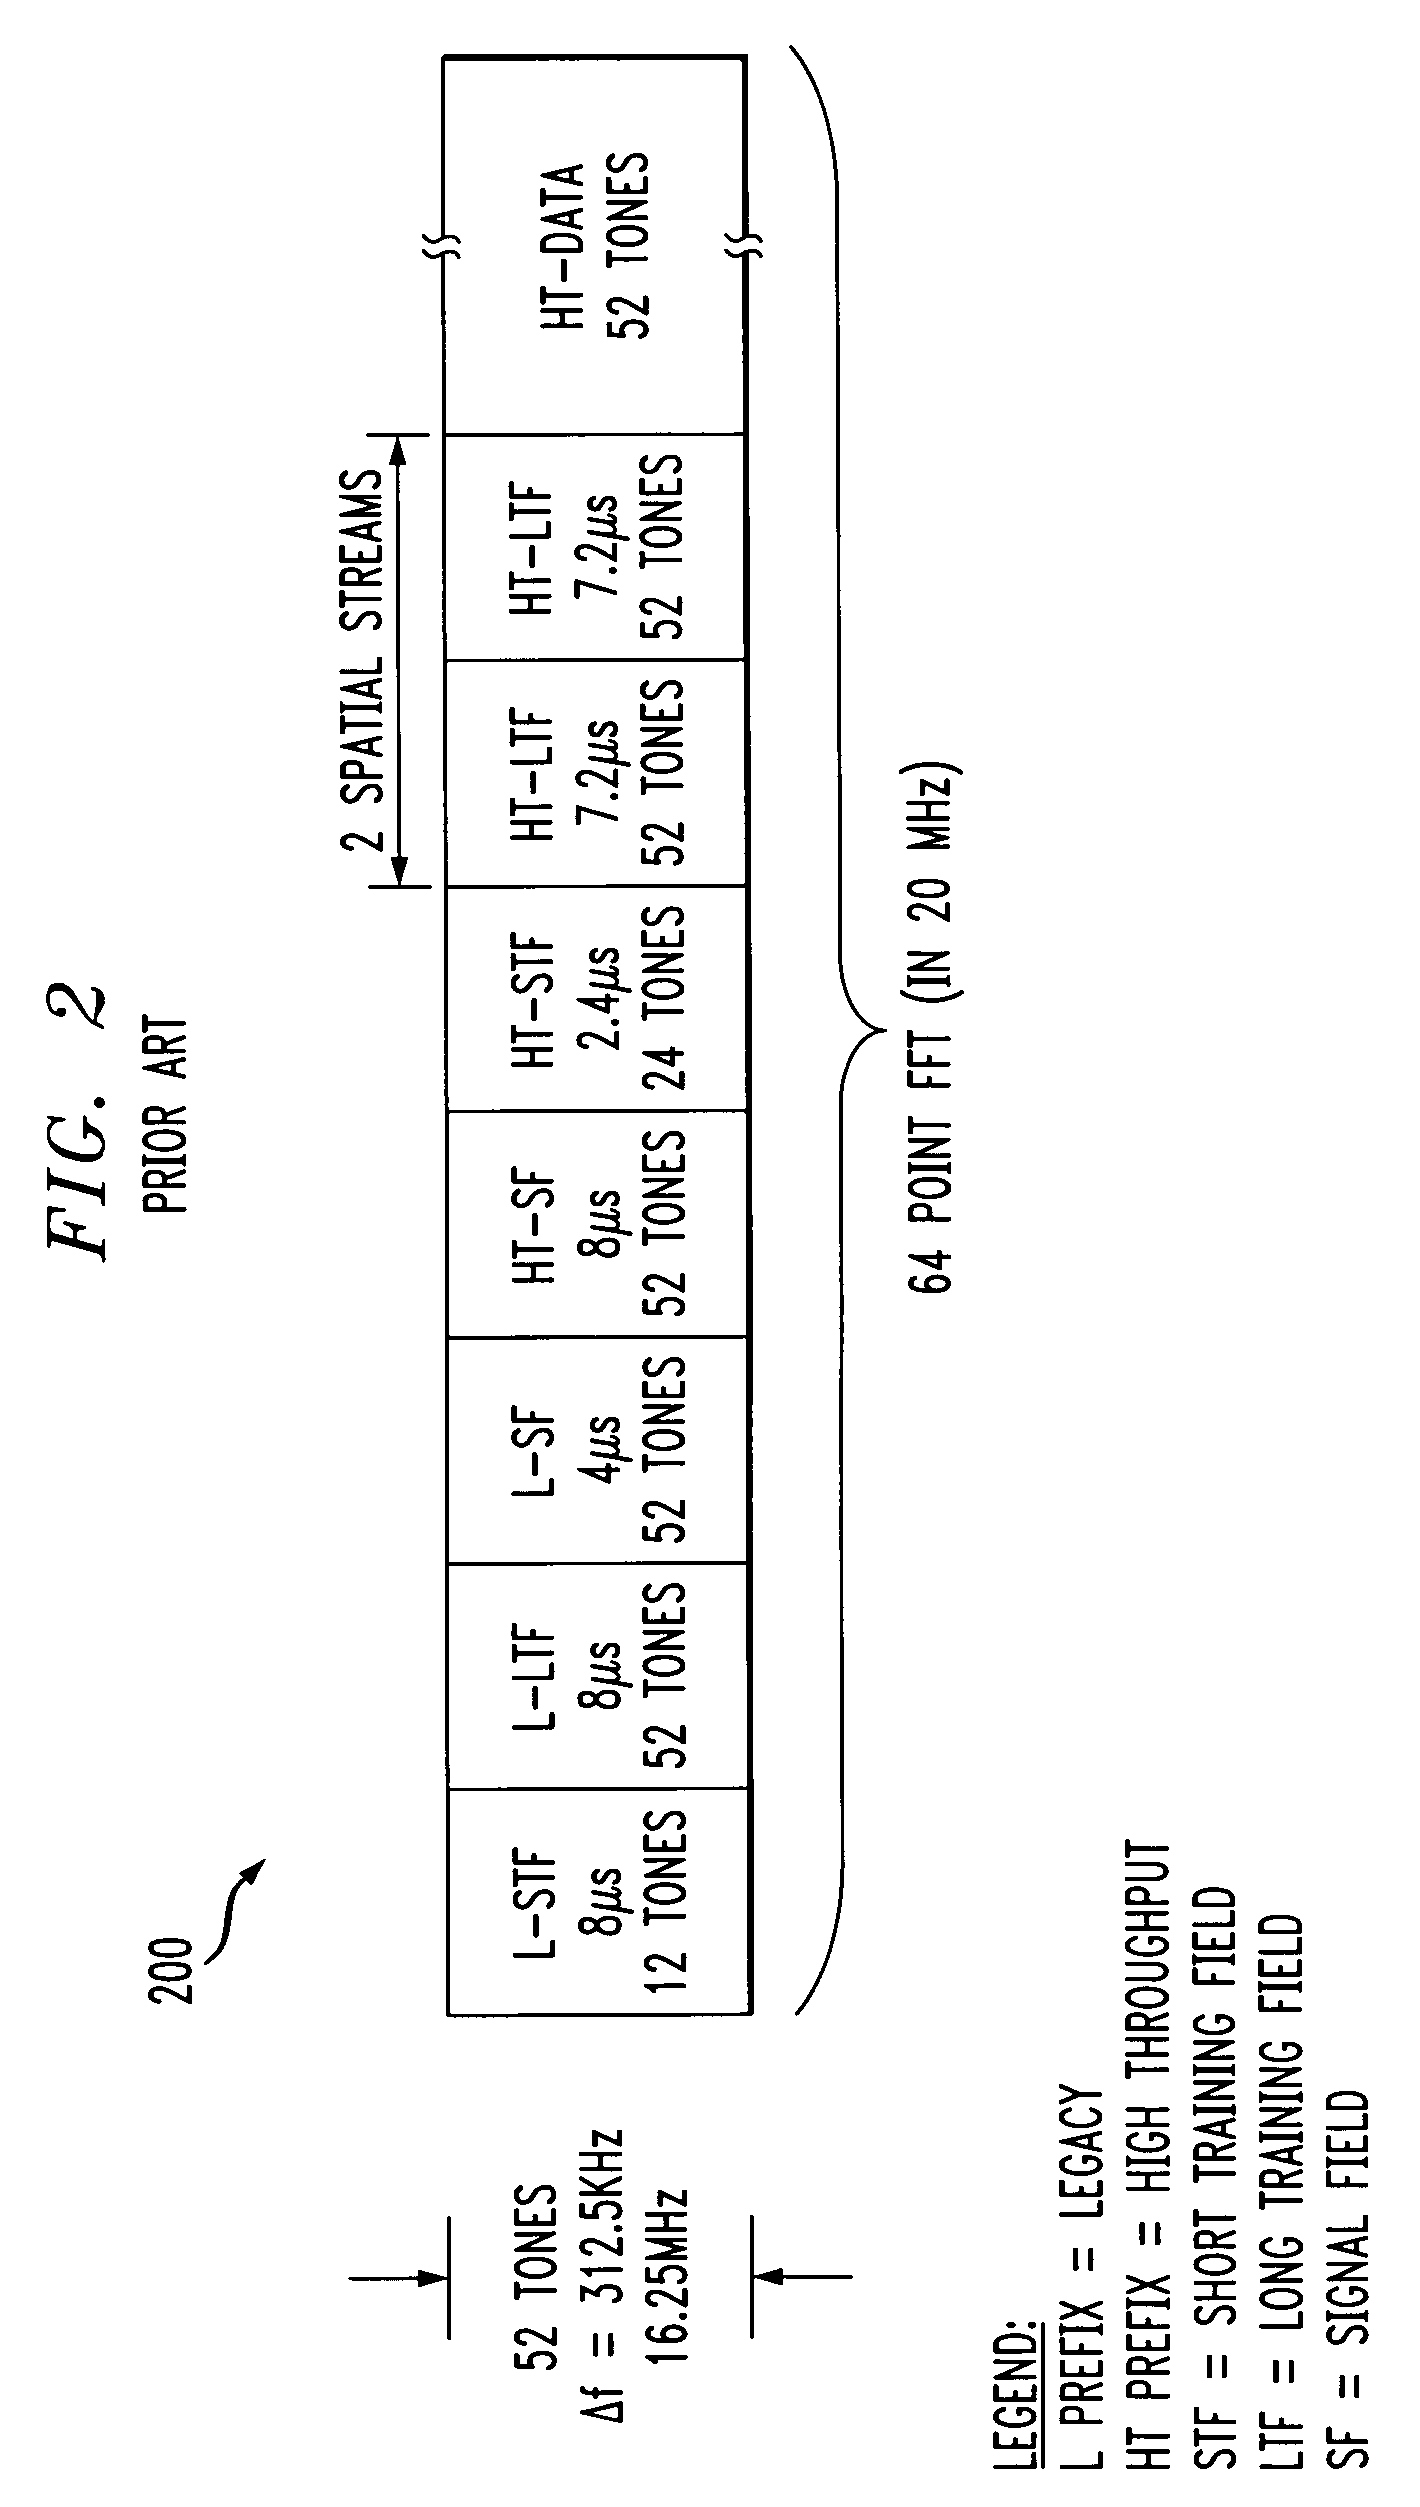 Method and apparatus for improved efficiency in an extended multiple antenna communication system